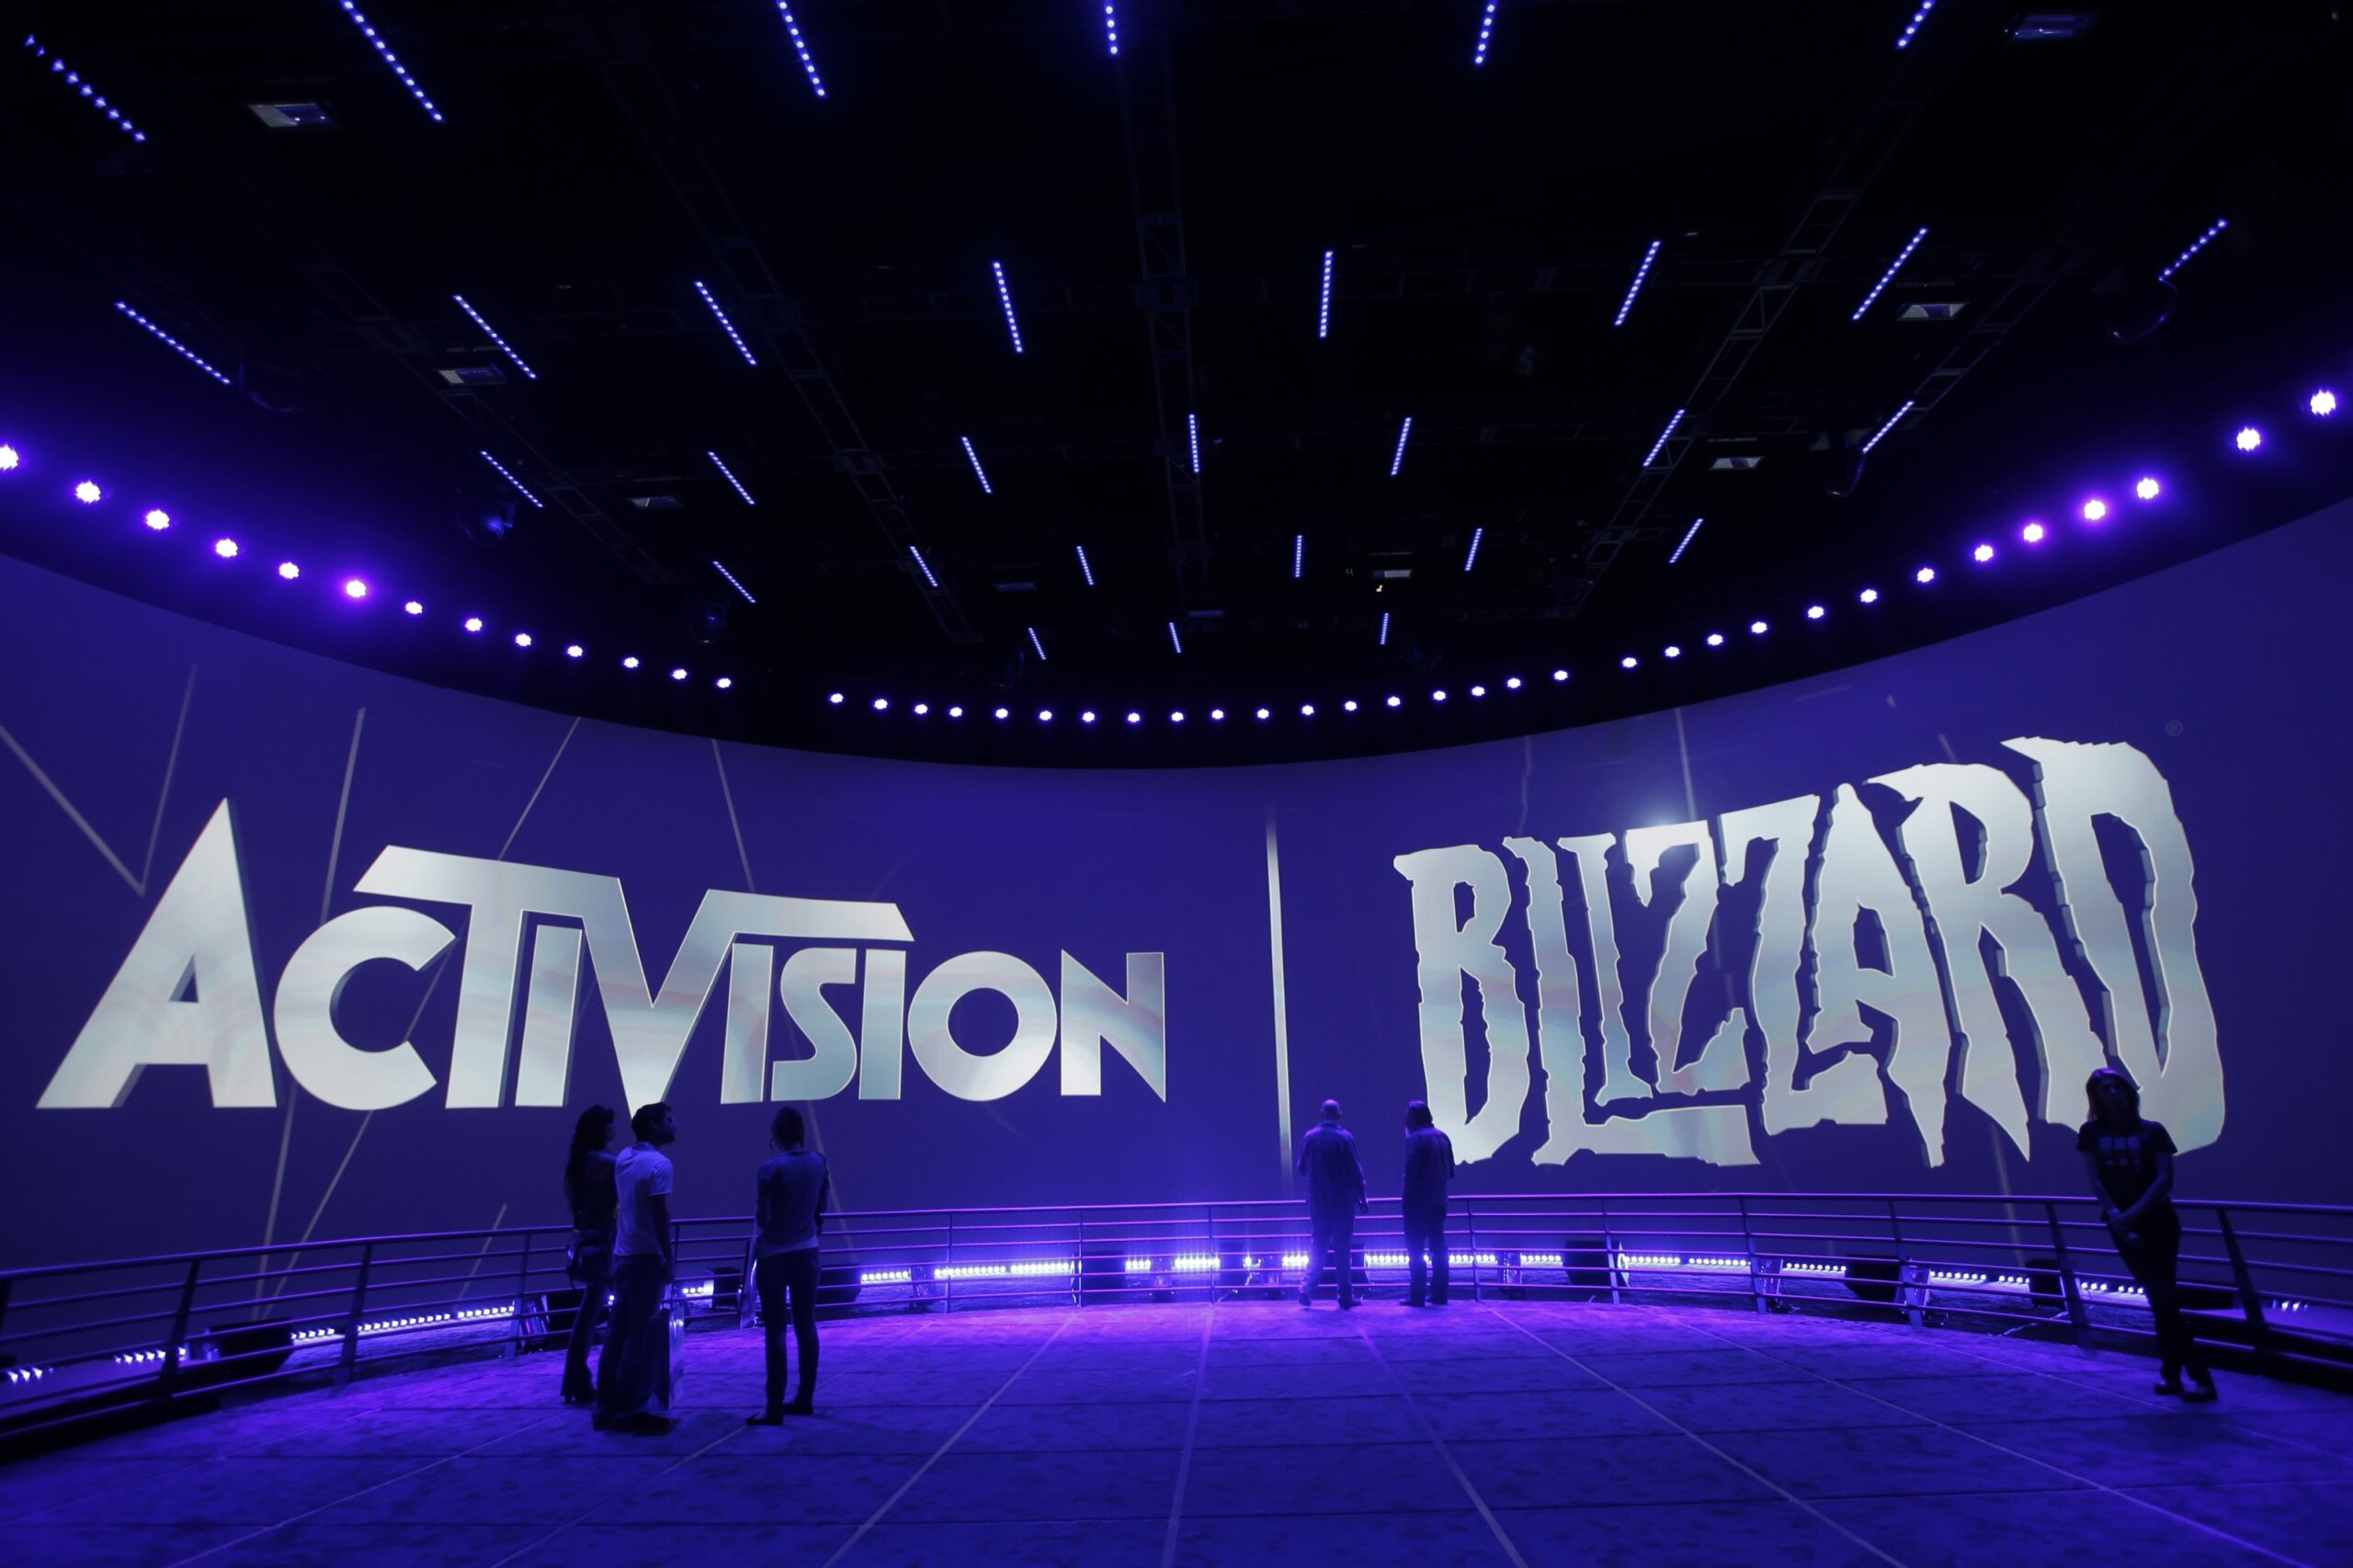 Activision settles another workplace suit for $35 million